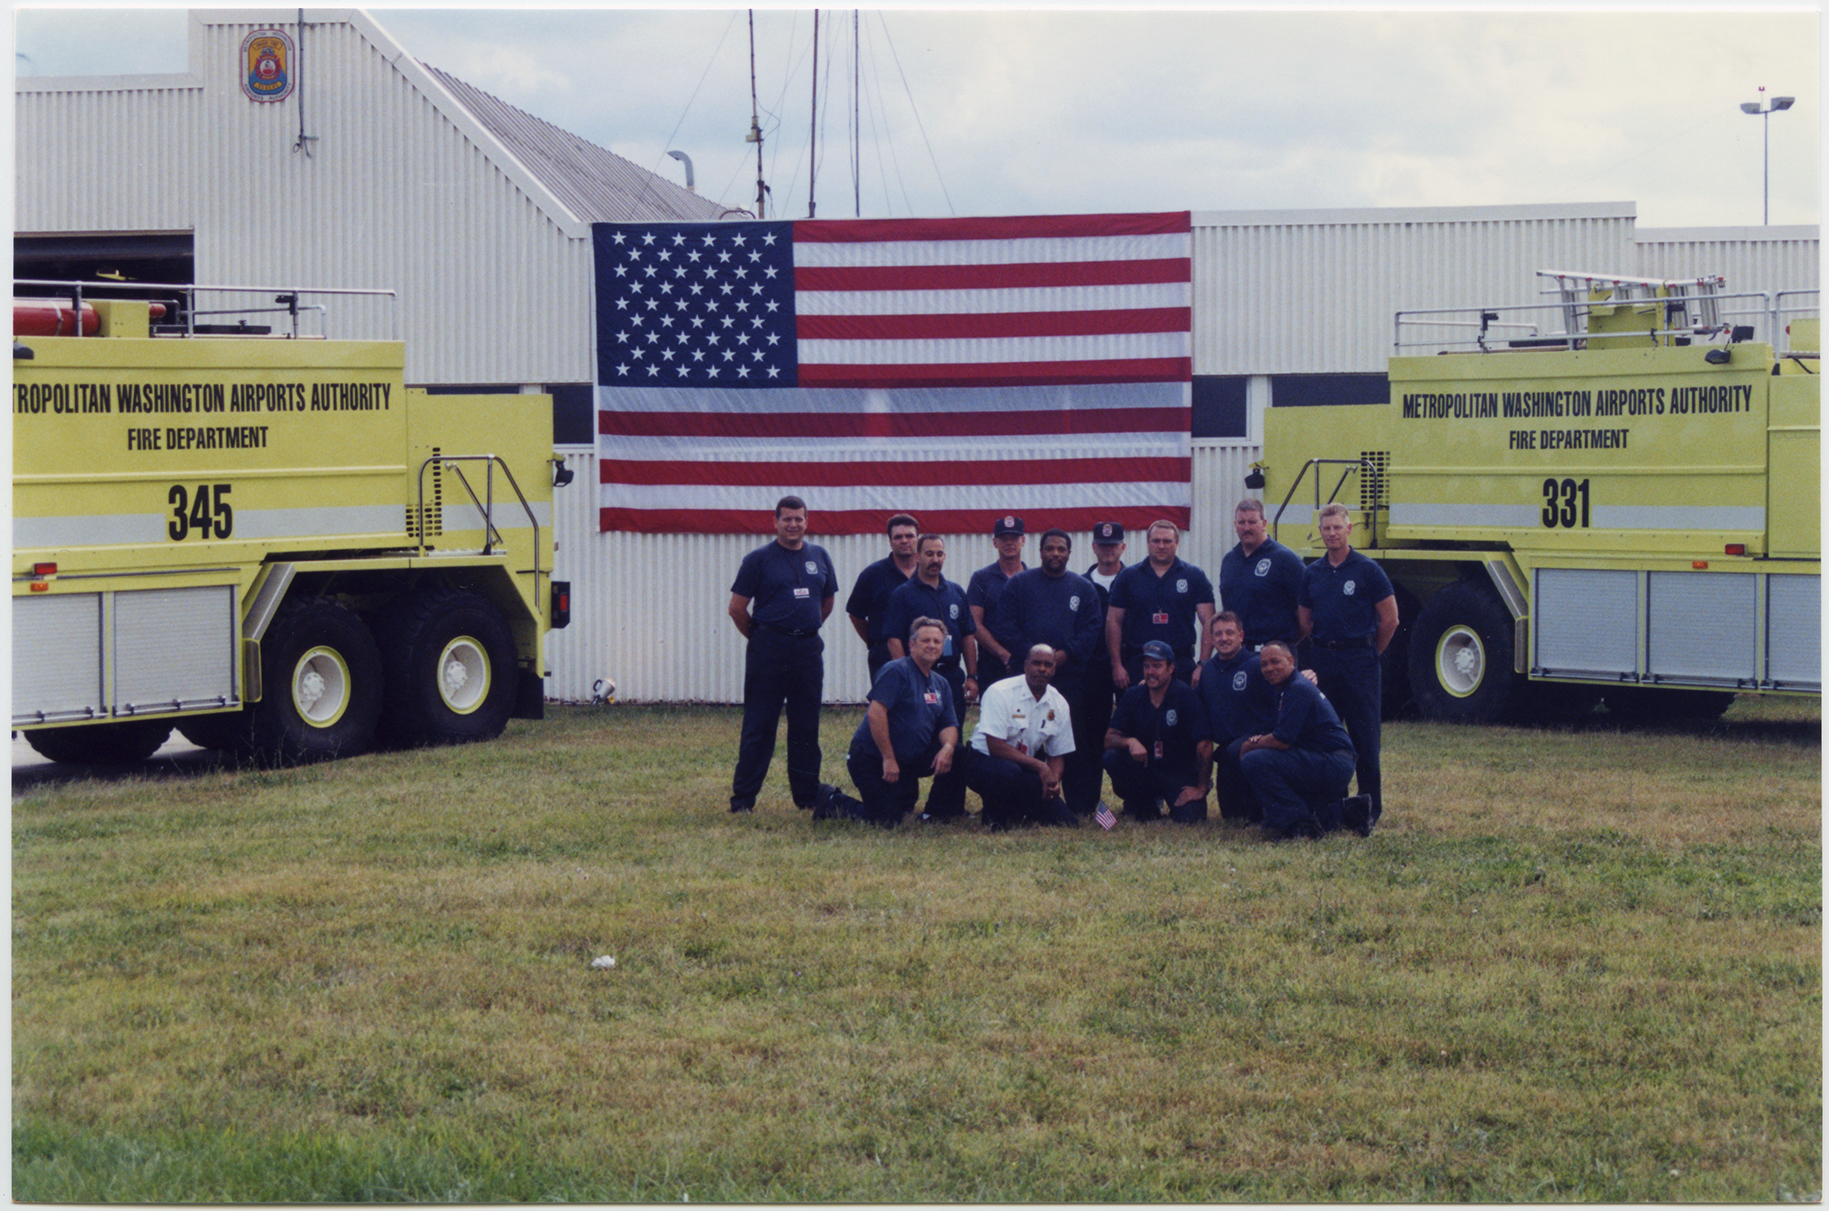 The two foam units, along with their crews, that were on the original call to the Pentagon on September 11, parked in front of the American flag displayed on the front of the National Airport fire station. 2001, 1 print, col., 4 x 6 in..